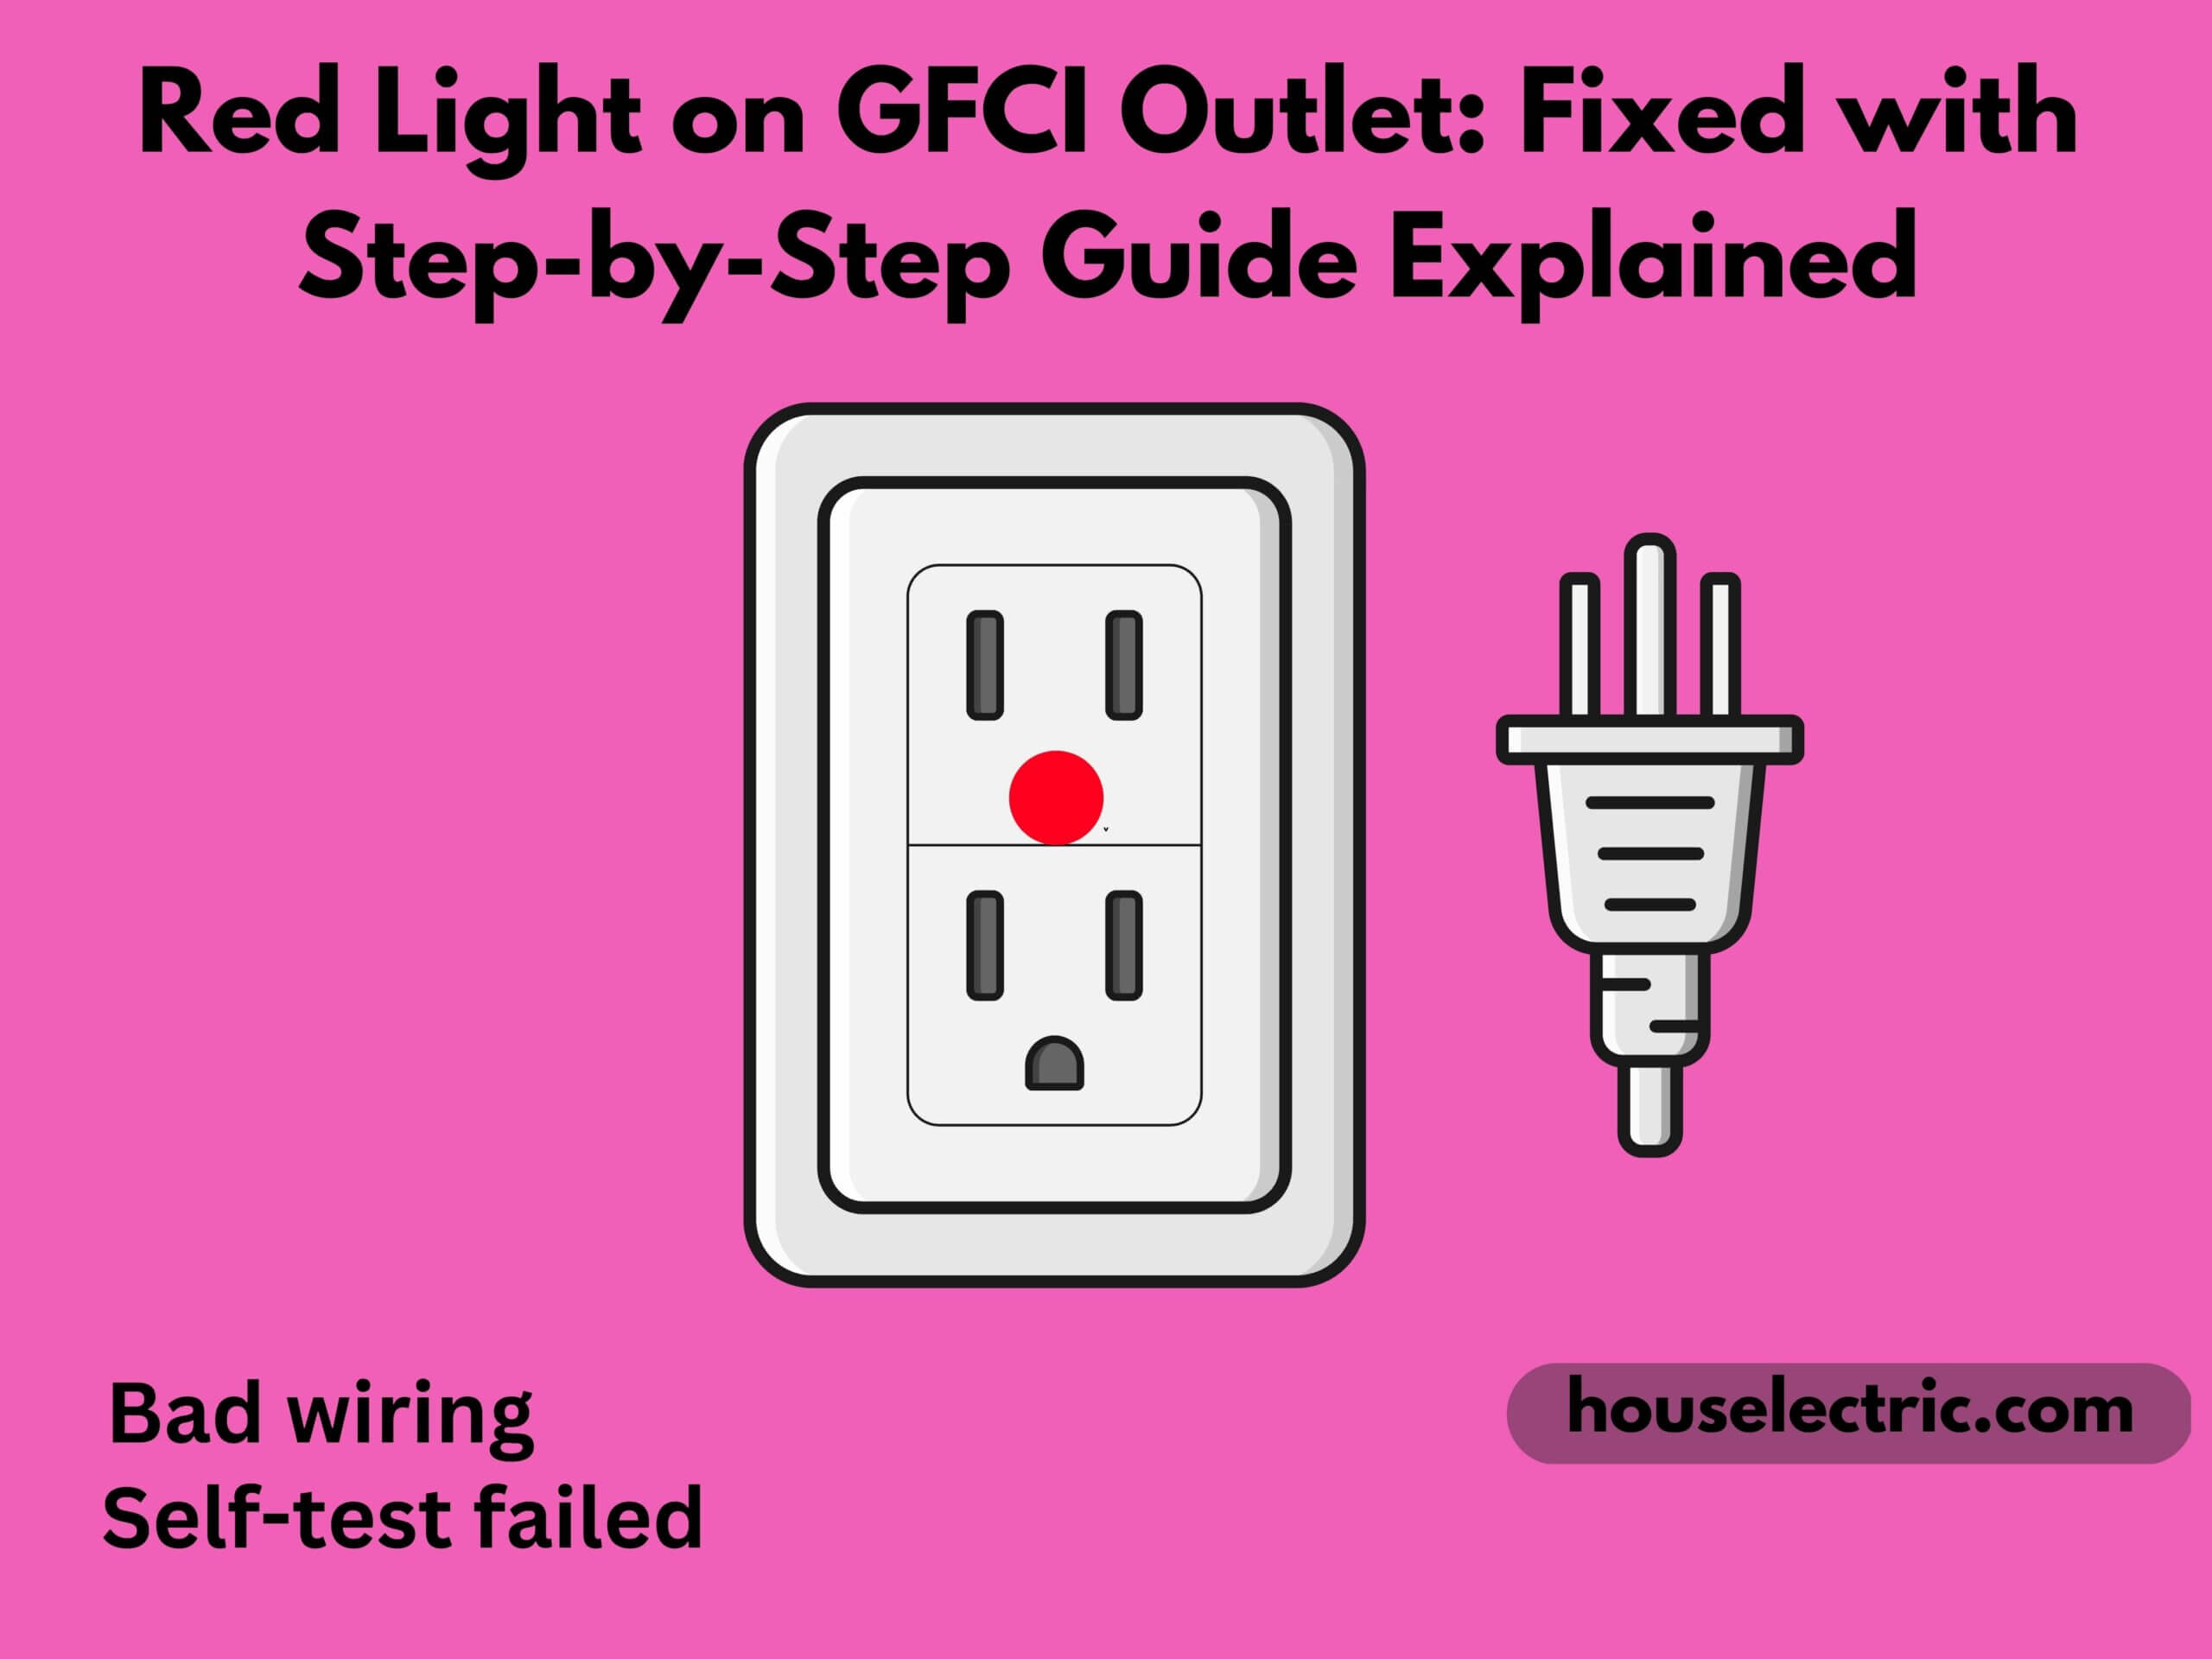 Red Light on GFCI Outlet